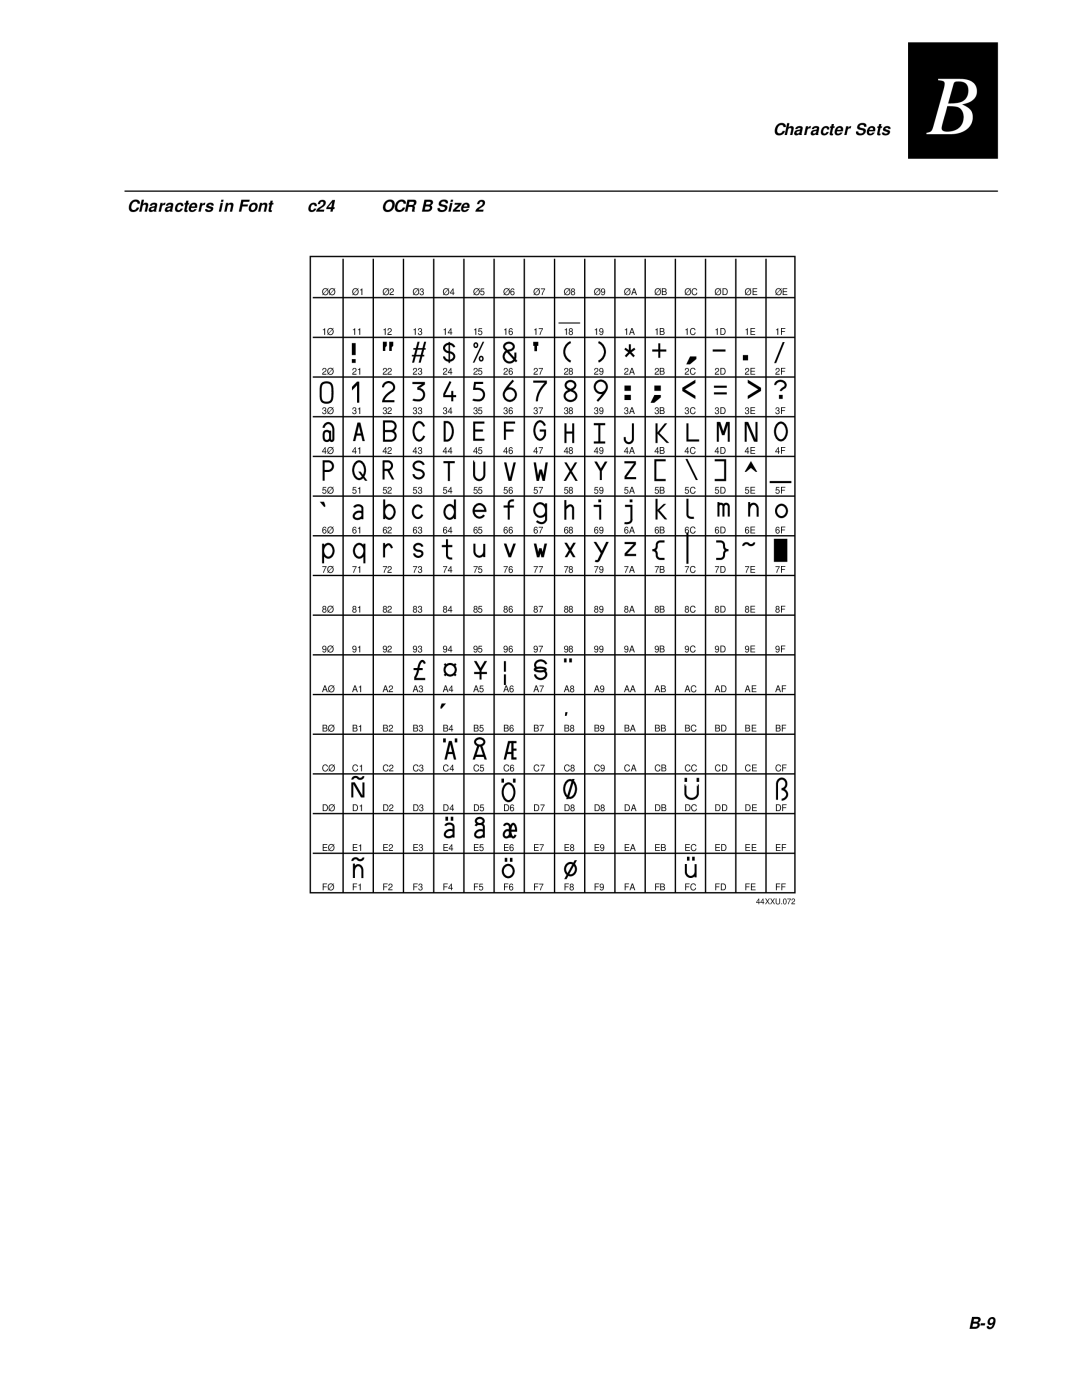 IBM EasyCoder 3400e user manual Characters in Font, Character Sets, OCR B Size, 44XXU.072 